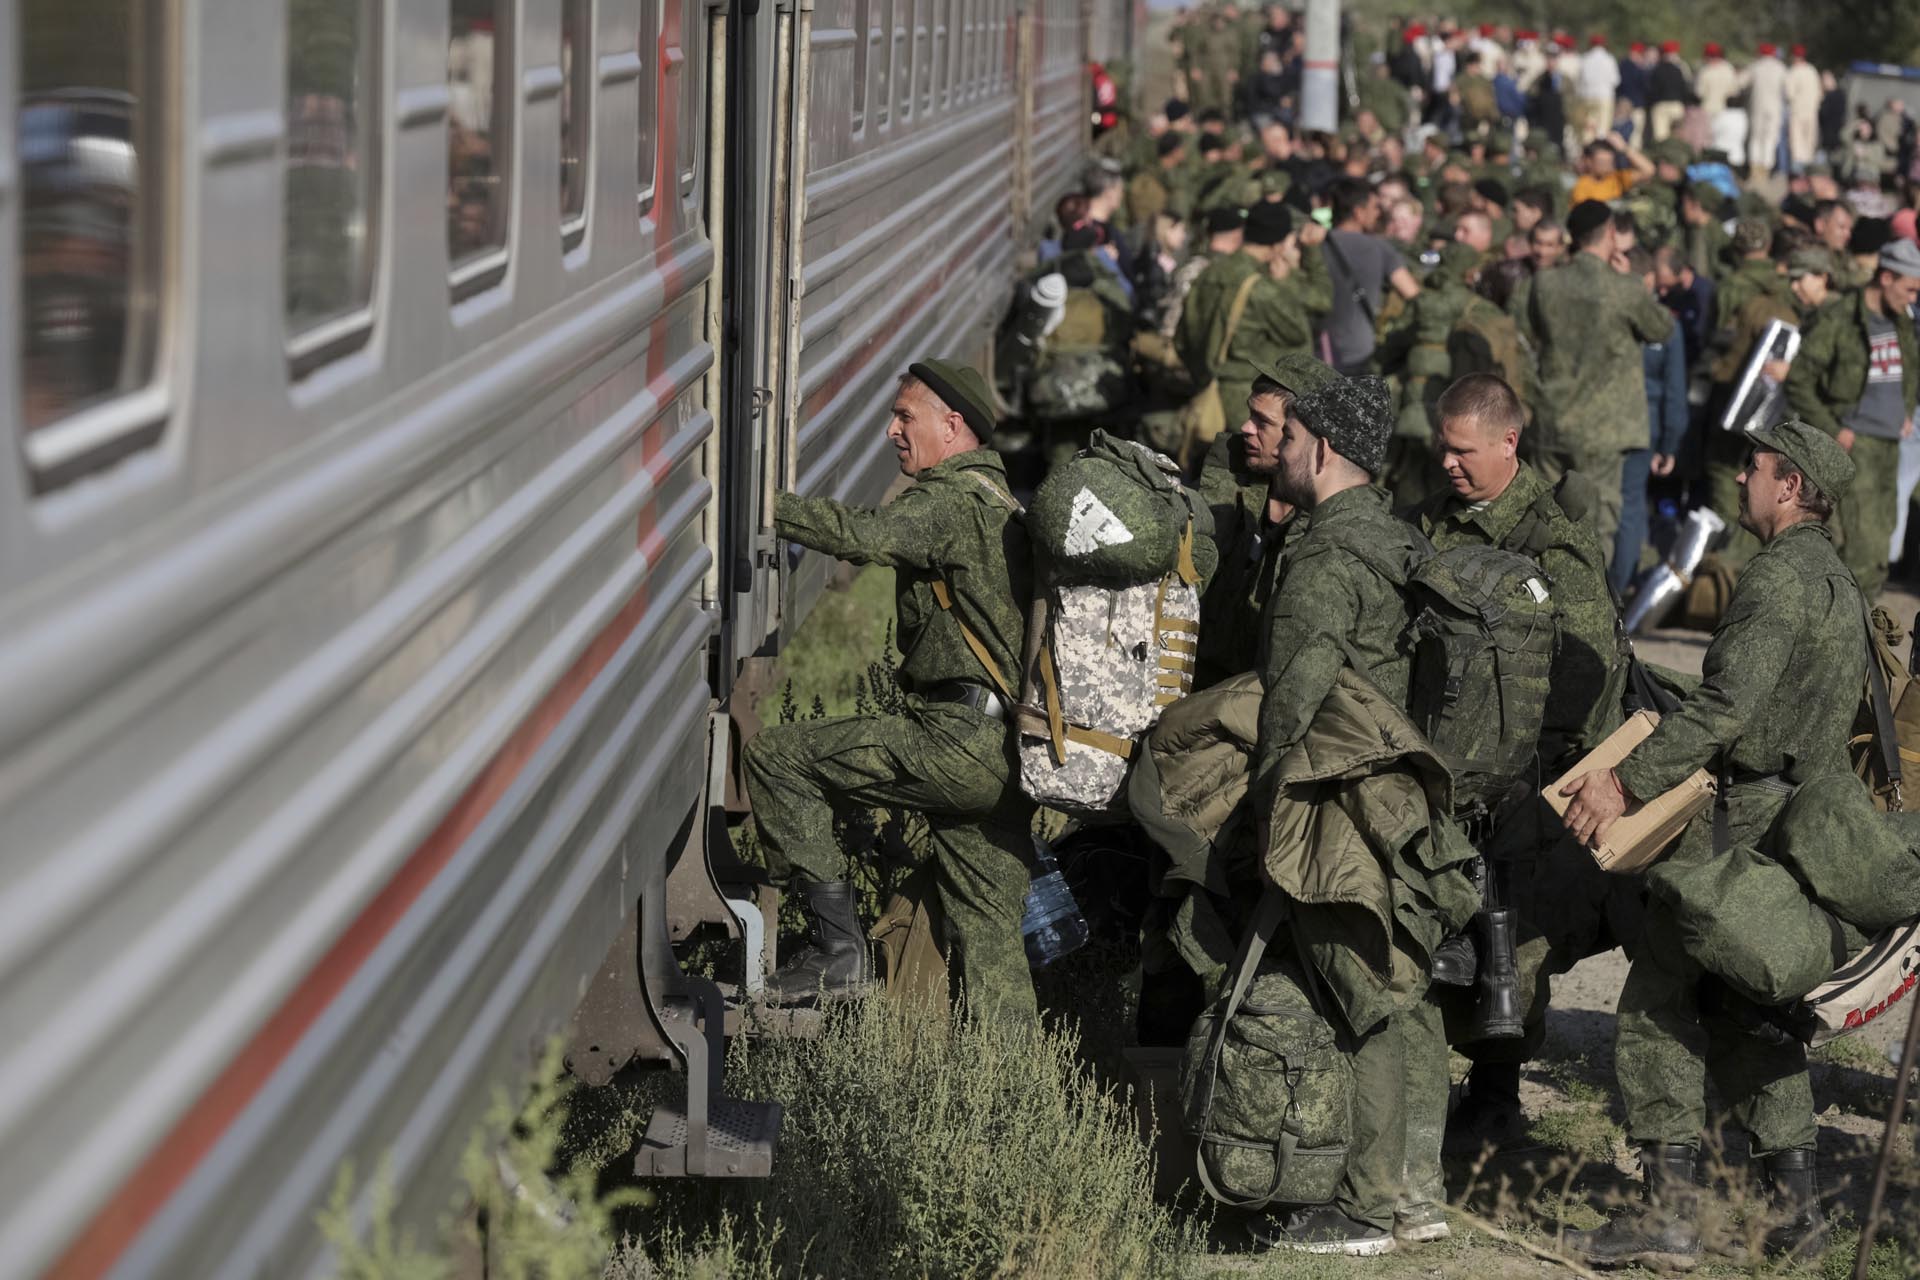 Russian recruits take a train at a railway station in Prudboi, in Russia’s Volgograd region, Thursday, Sept. 29, 2022. President Vladimir Putin announced a partial mobilization, the first since World War II, amid the war in Ukraine. (AP Photo, File)